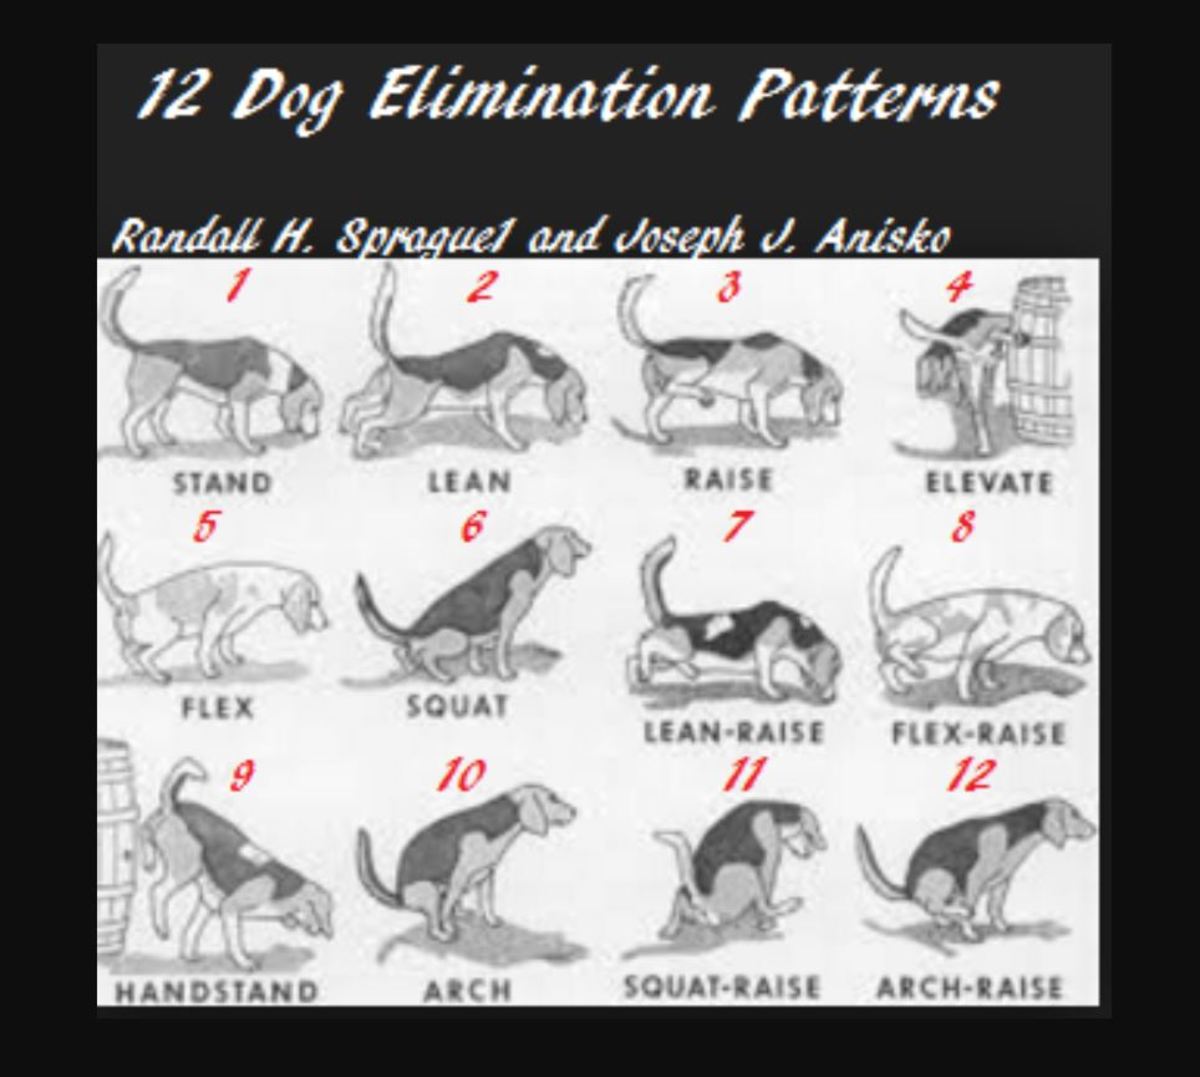 The 12 elimination patterns exhibited by dogs.